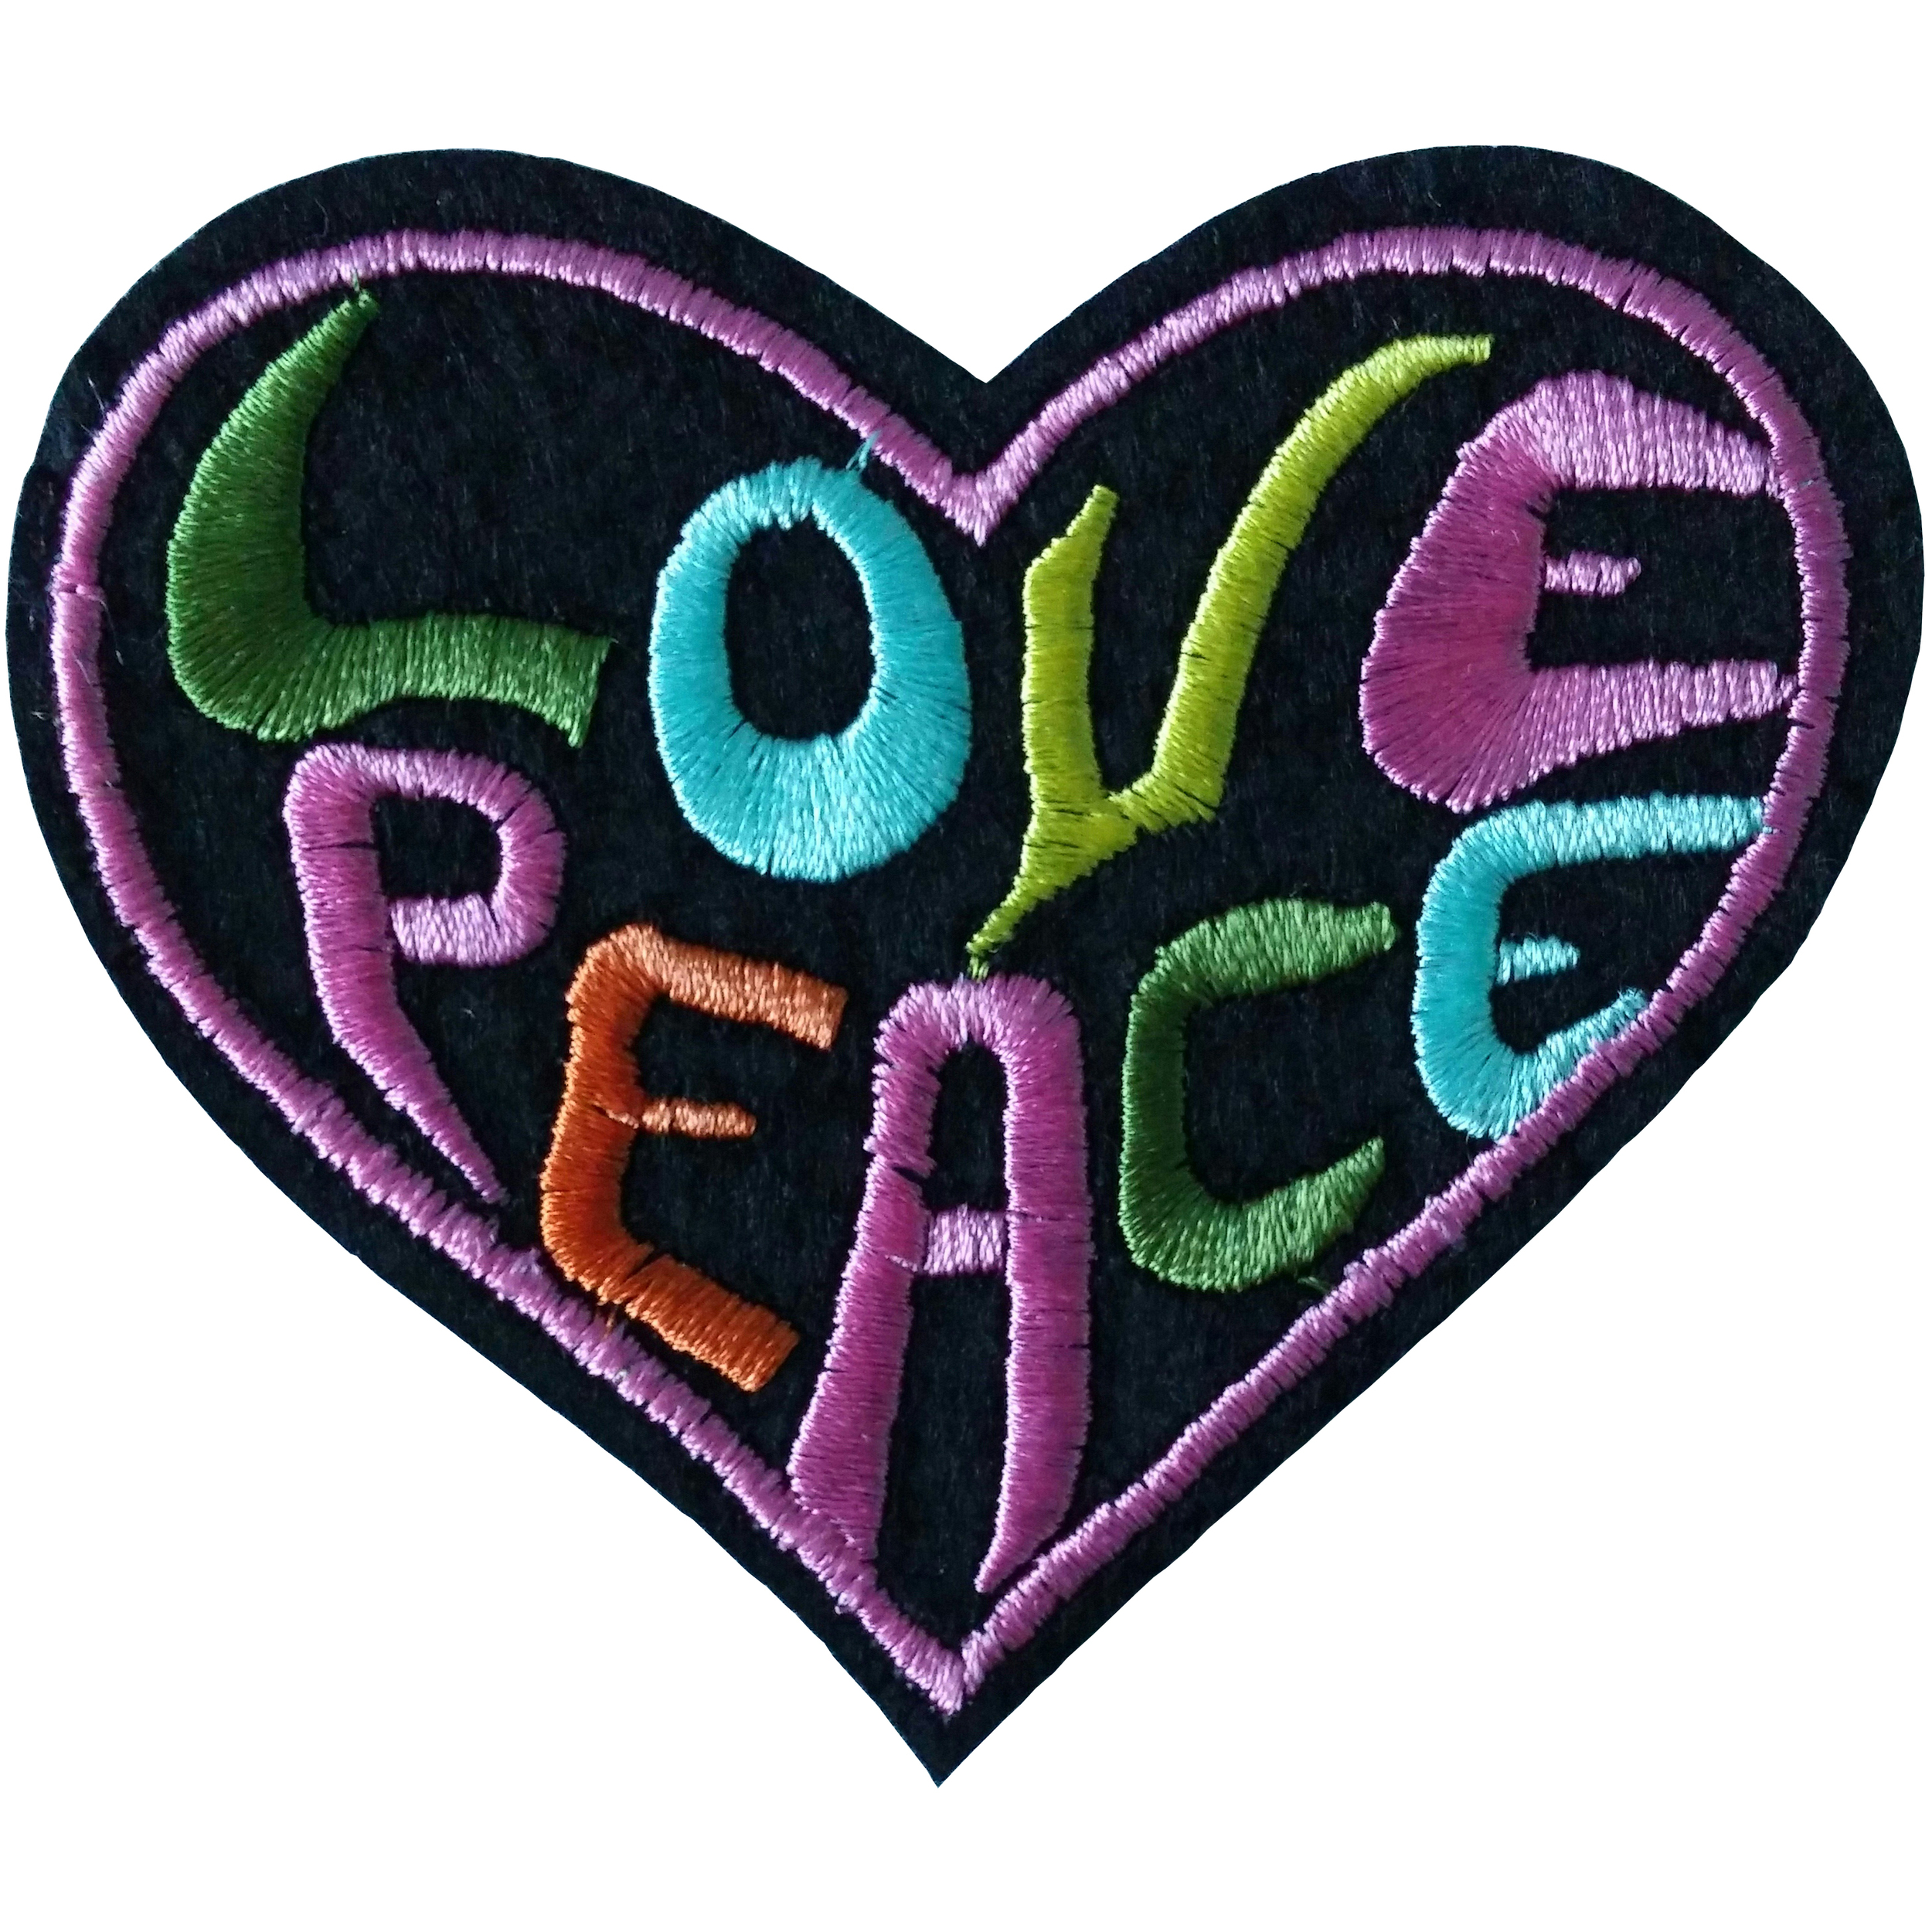 Patch Thermocollant Coeur Love Peace Amour Paix